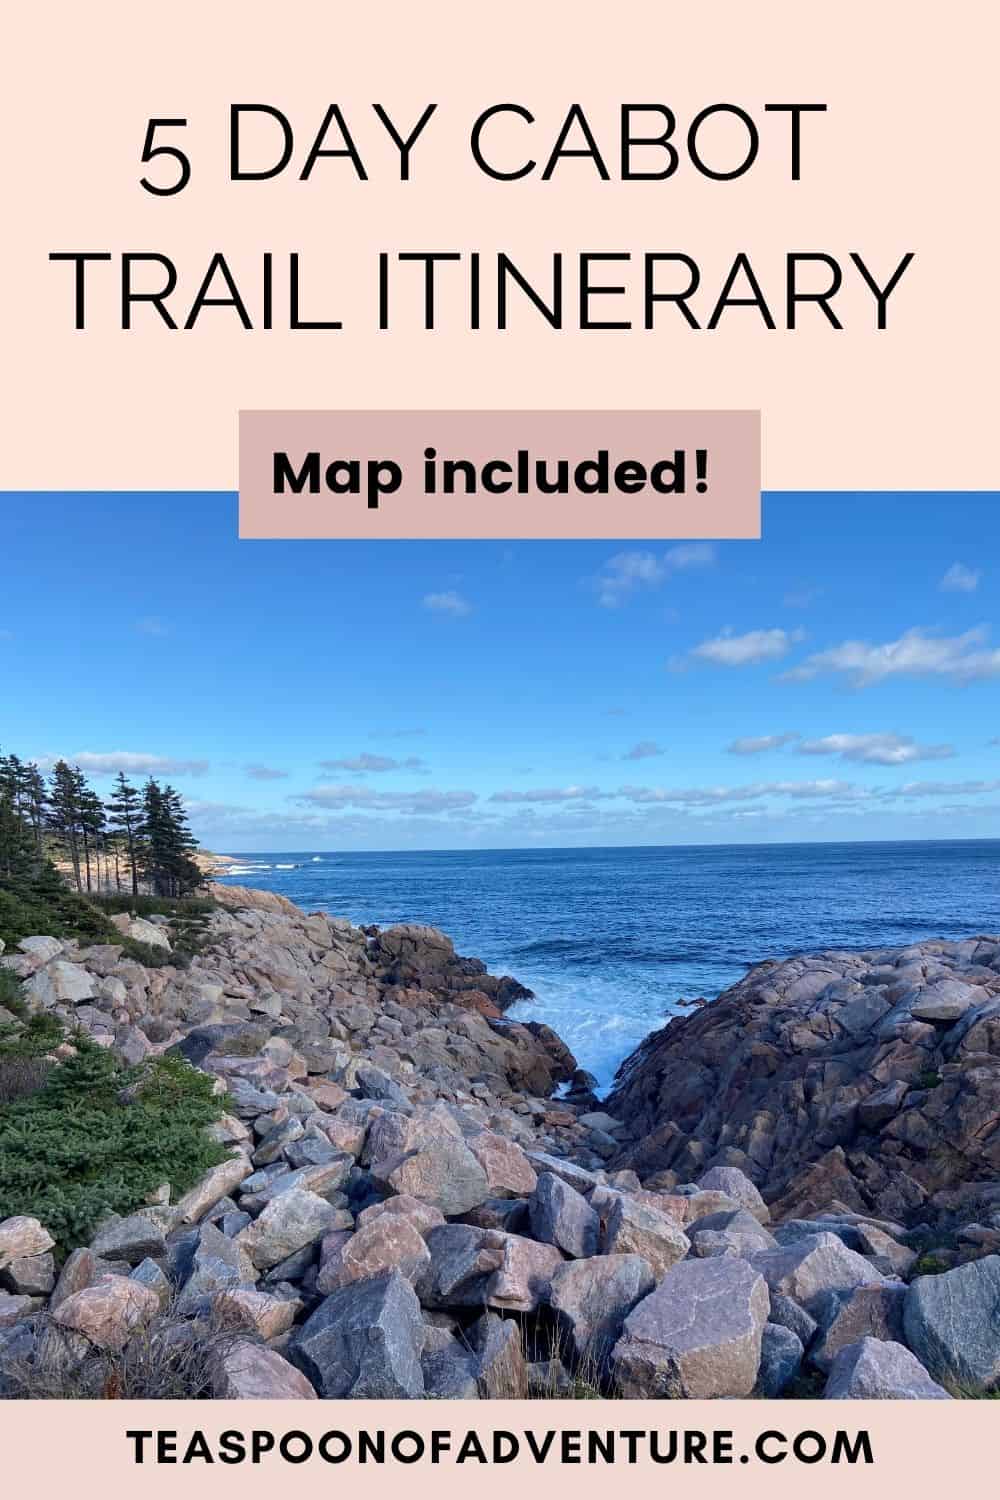 CAPE BRETON ISLAND, NOVA SCOTIA: Check out how to spend 5 days on Cape Breton Island with my Cabot Trail itinerary! Where to stay, when to go, what to see and more on the Cabot Trail! #cabottrail #capebreton #capebretonisland #roadtrip #travel #novascotia #canada #travelcanada